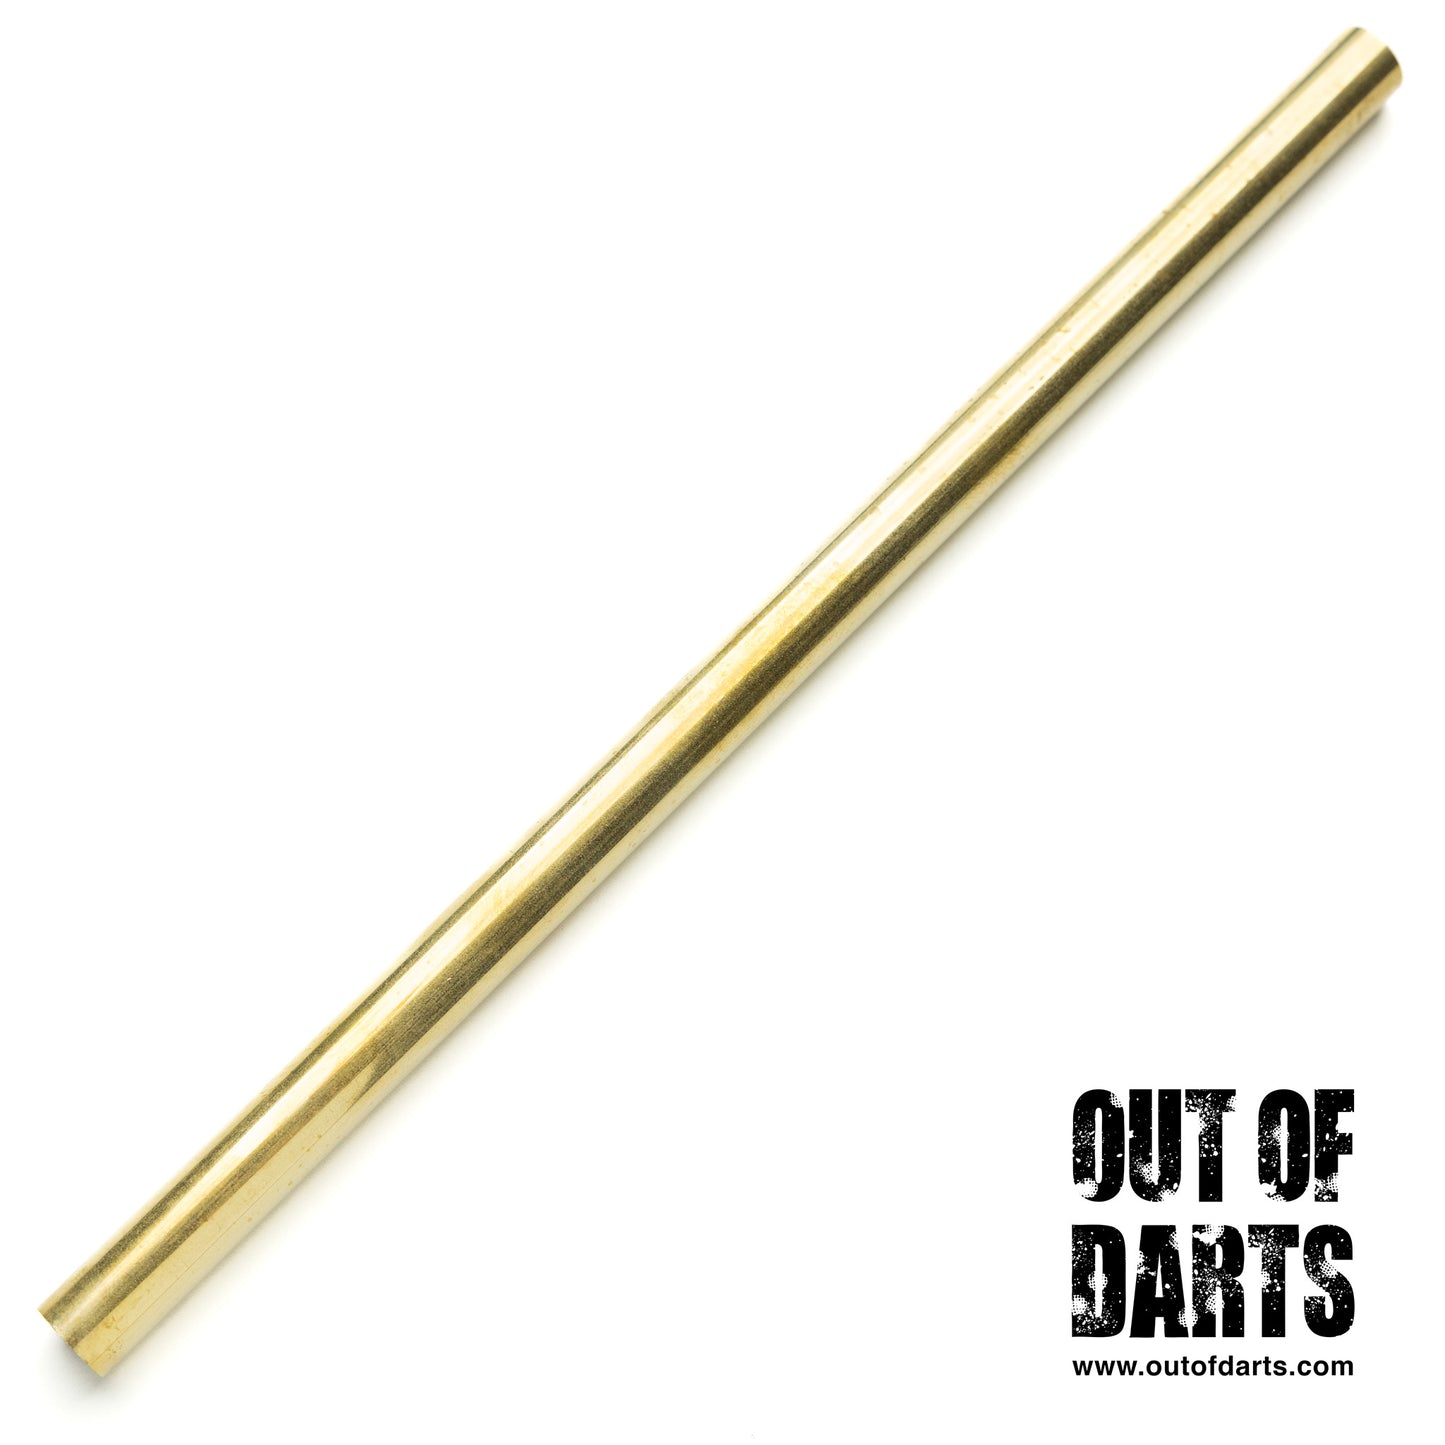 Brass Tubing (4 sizes) K&S Metals – Out of Darts